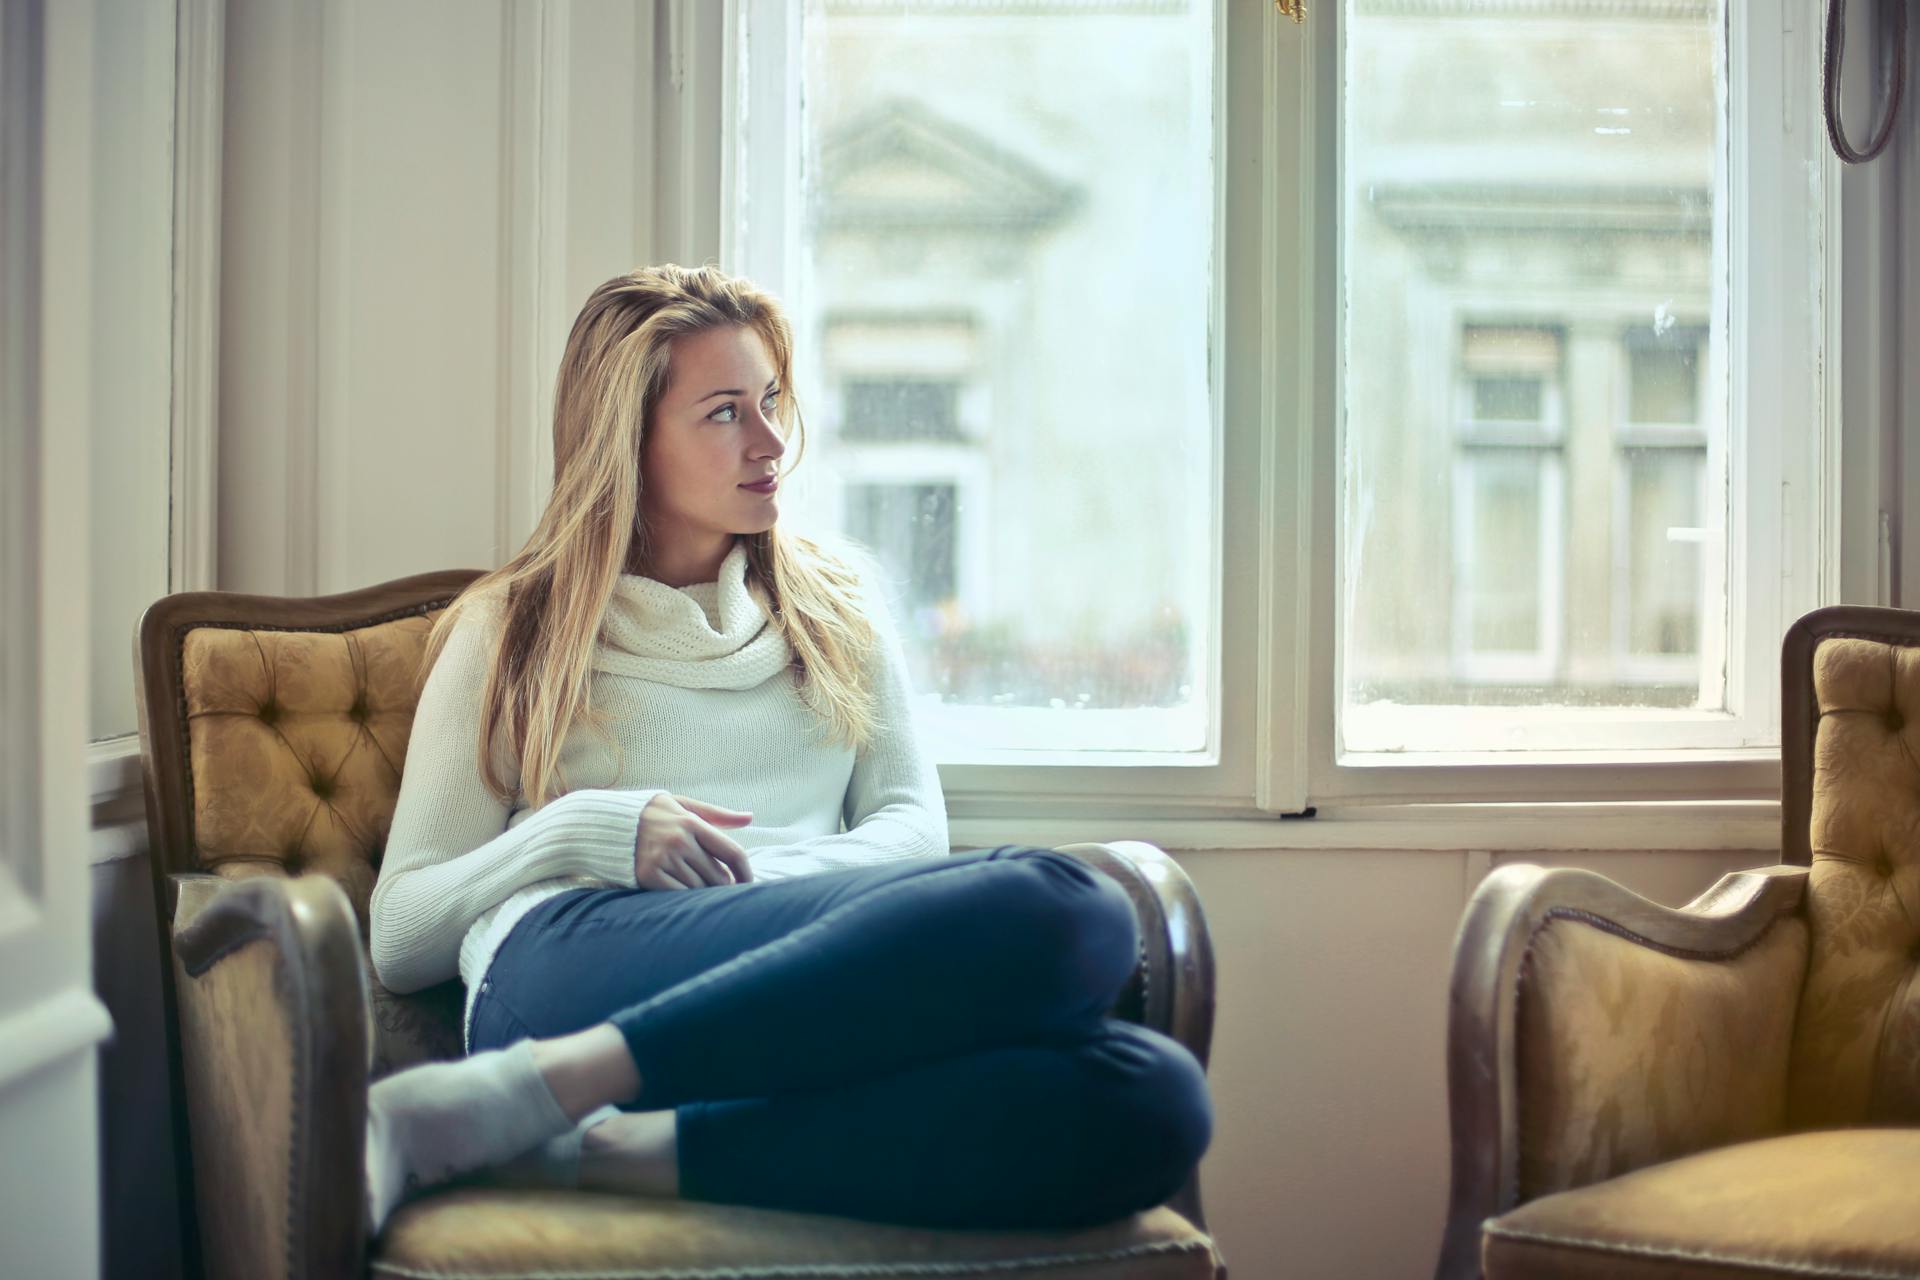 A woman sitting on a couch | Source: Pexels